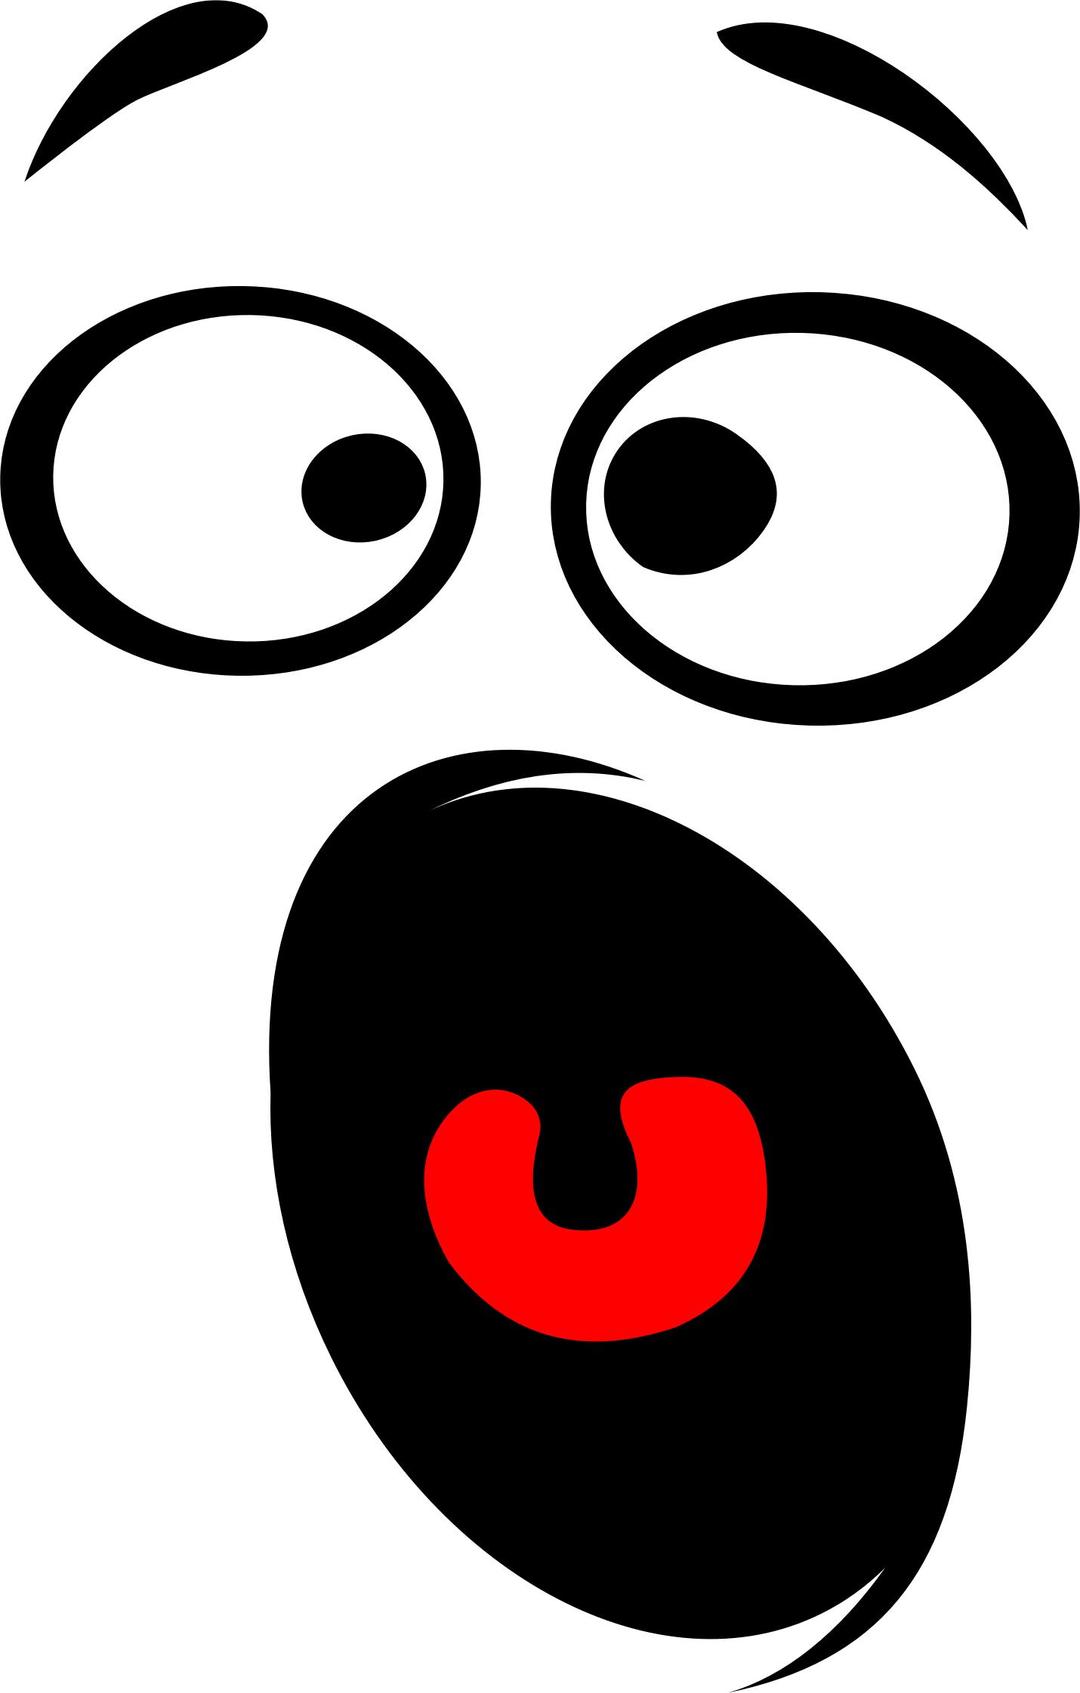 Horrified Smiley Face Silhouette png transparent